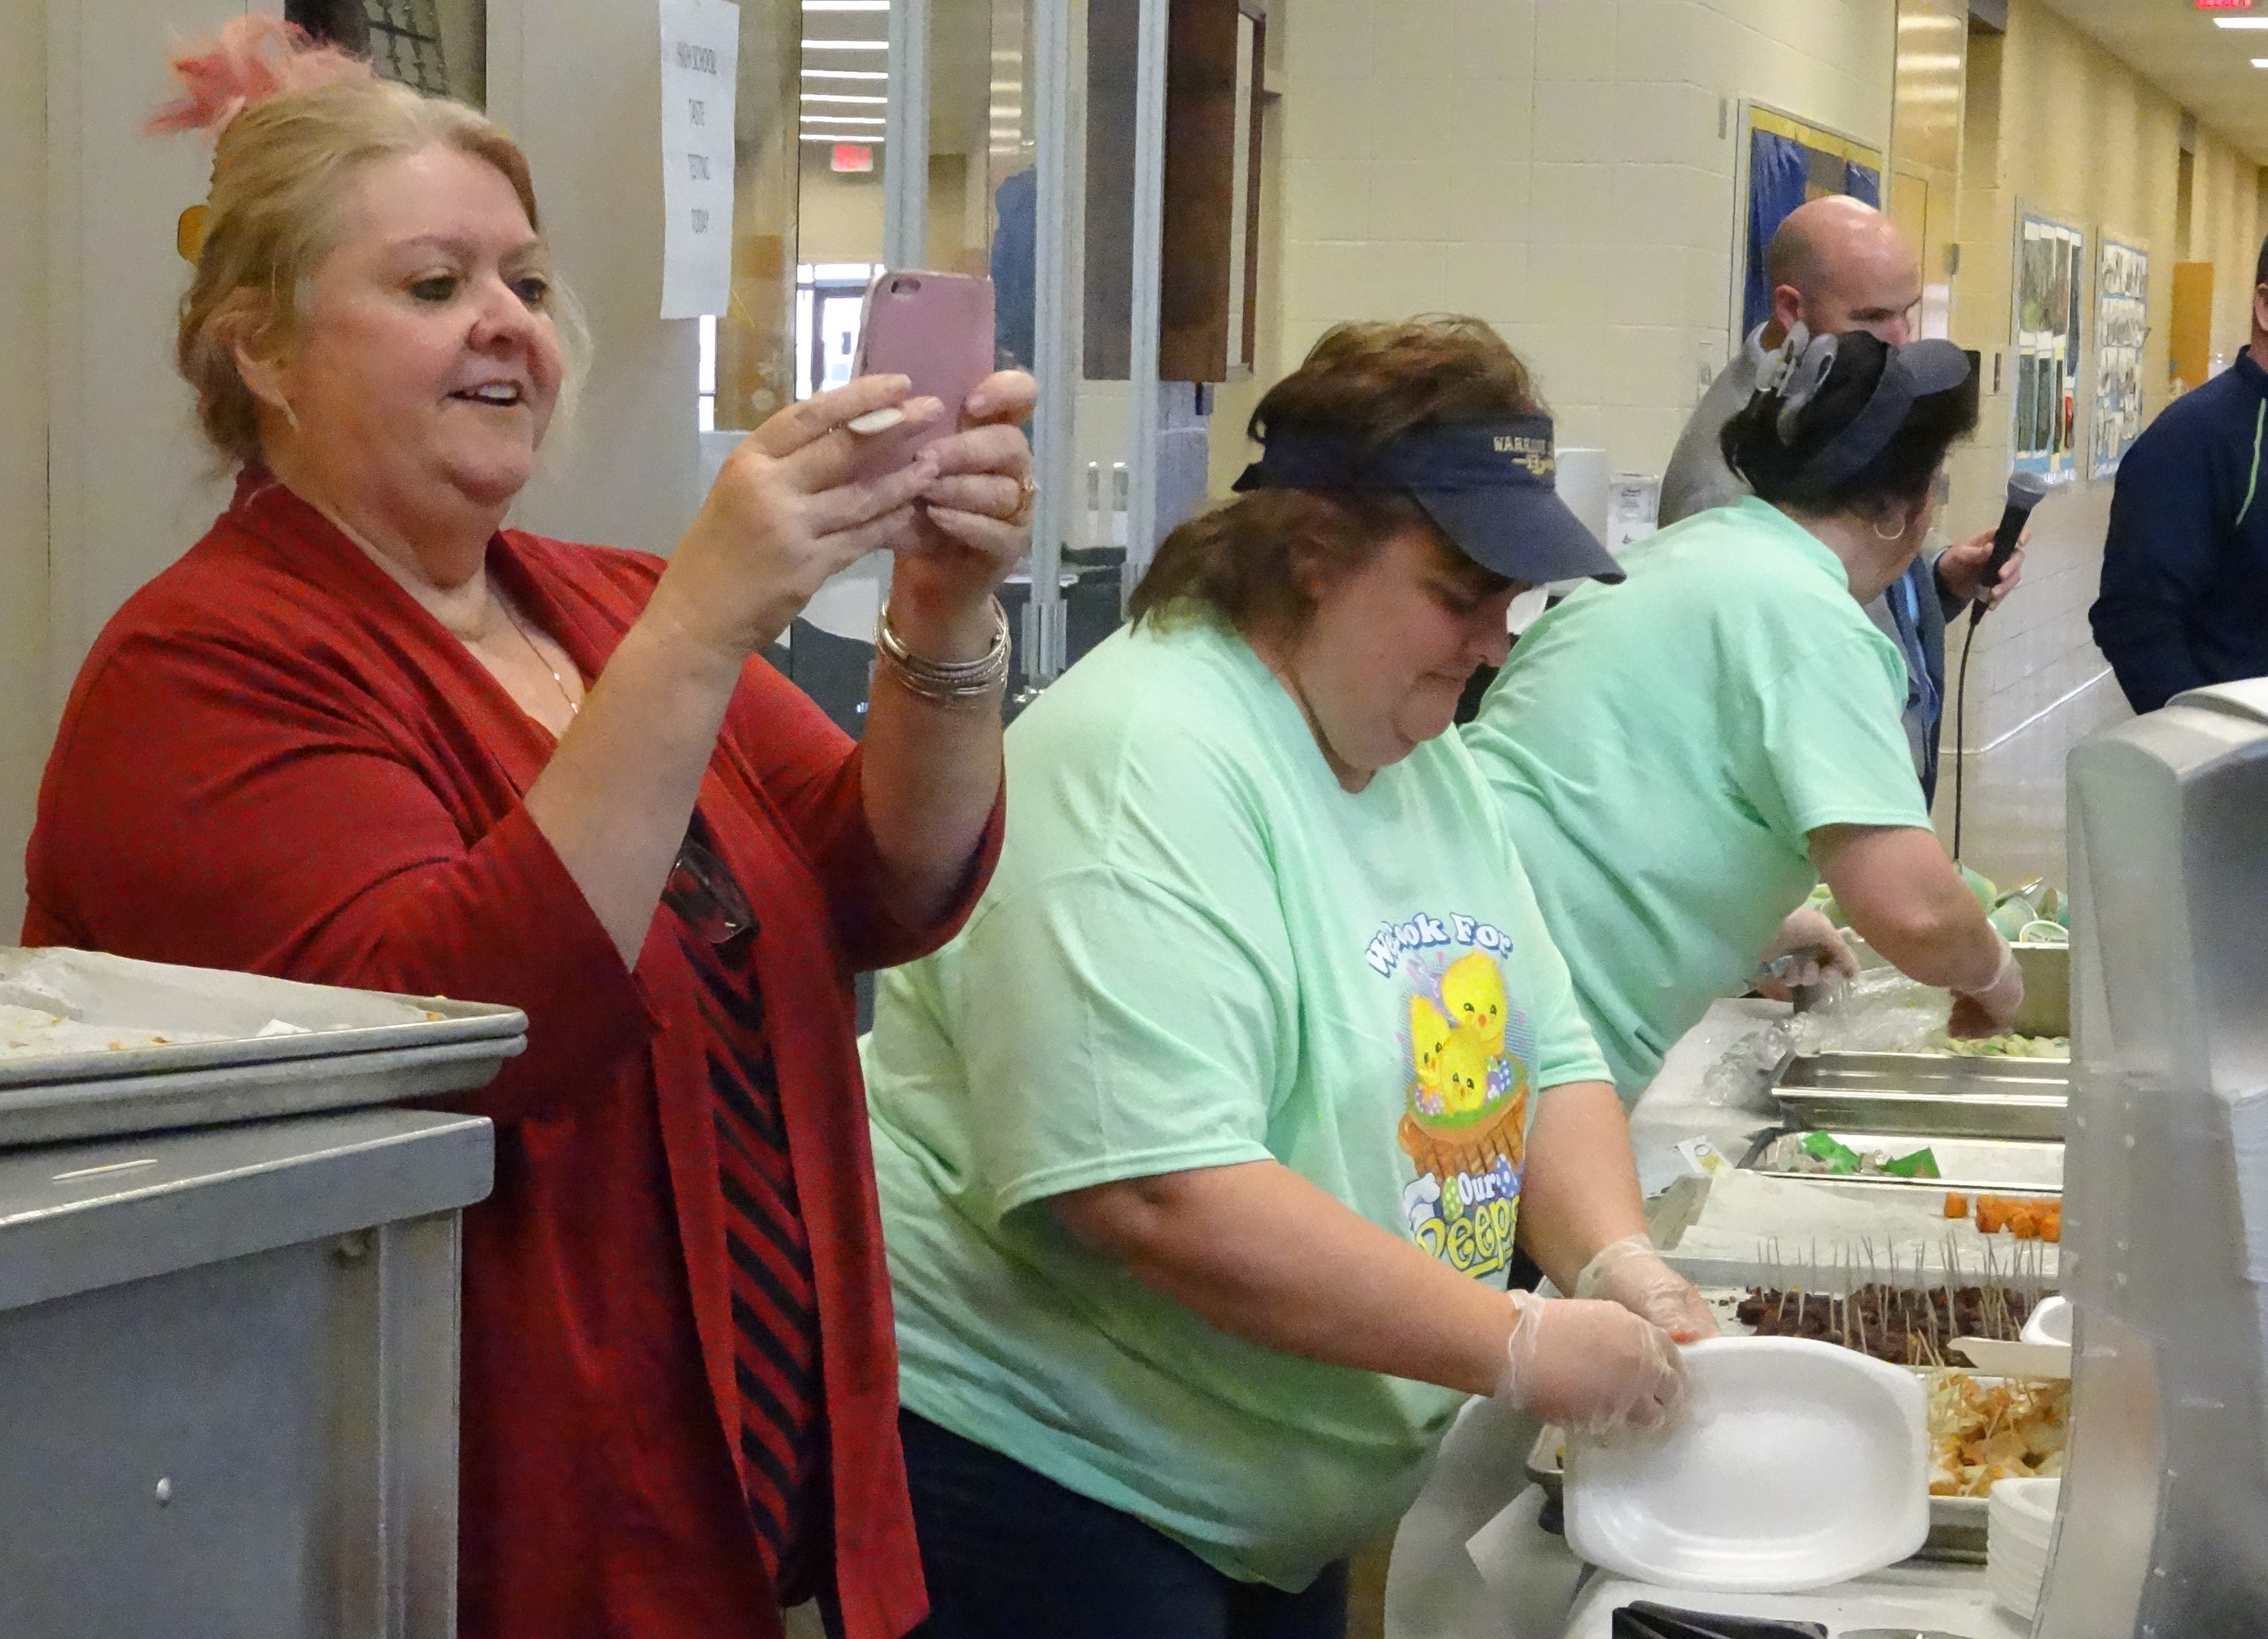 Brookfield Cafeteria Supervisor Donna Bailey takes pictures of students falling in line for a taste test of potential new lunch offerings. Also shown are Kim Osberg and Leanne Mosora.